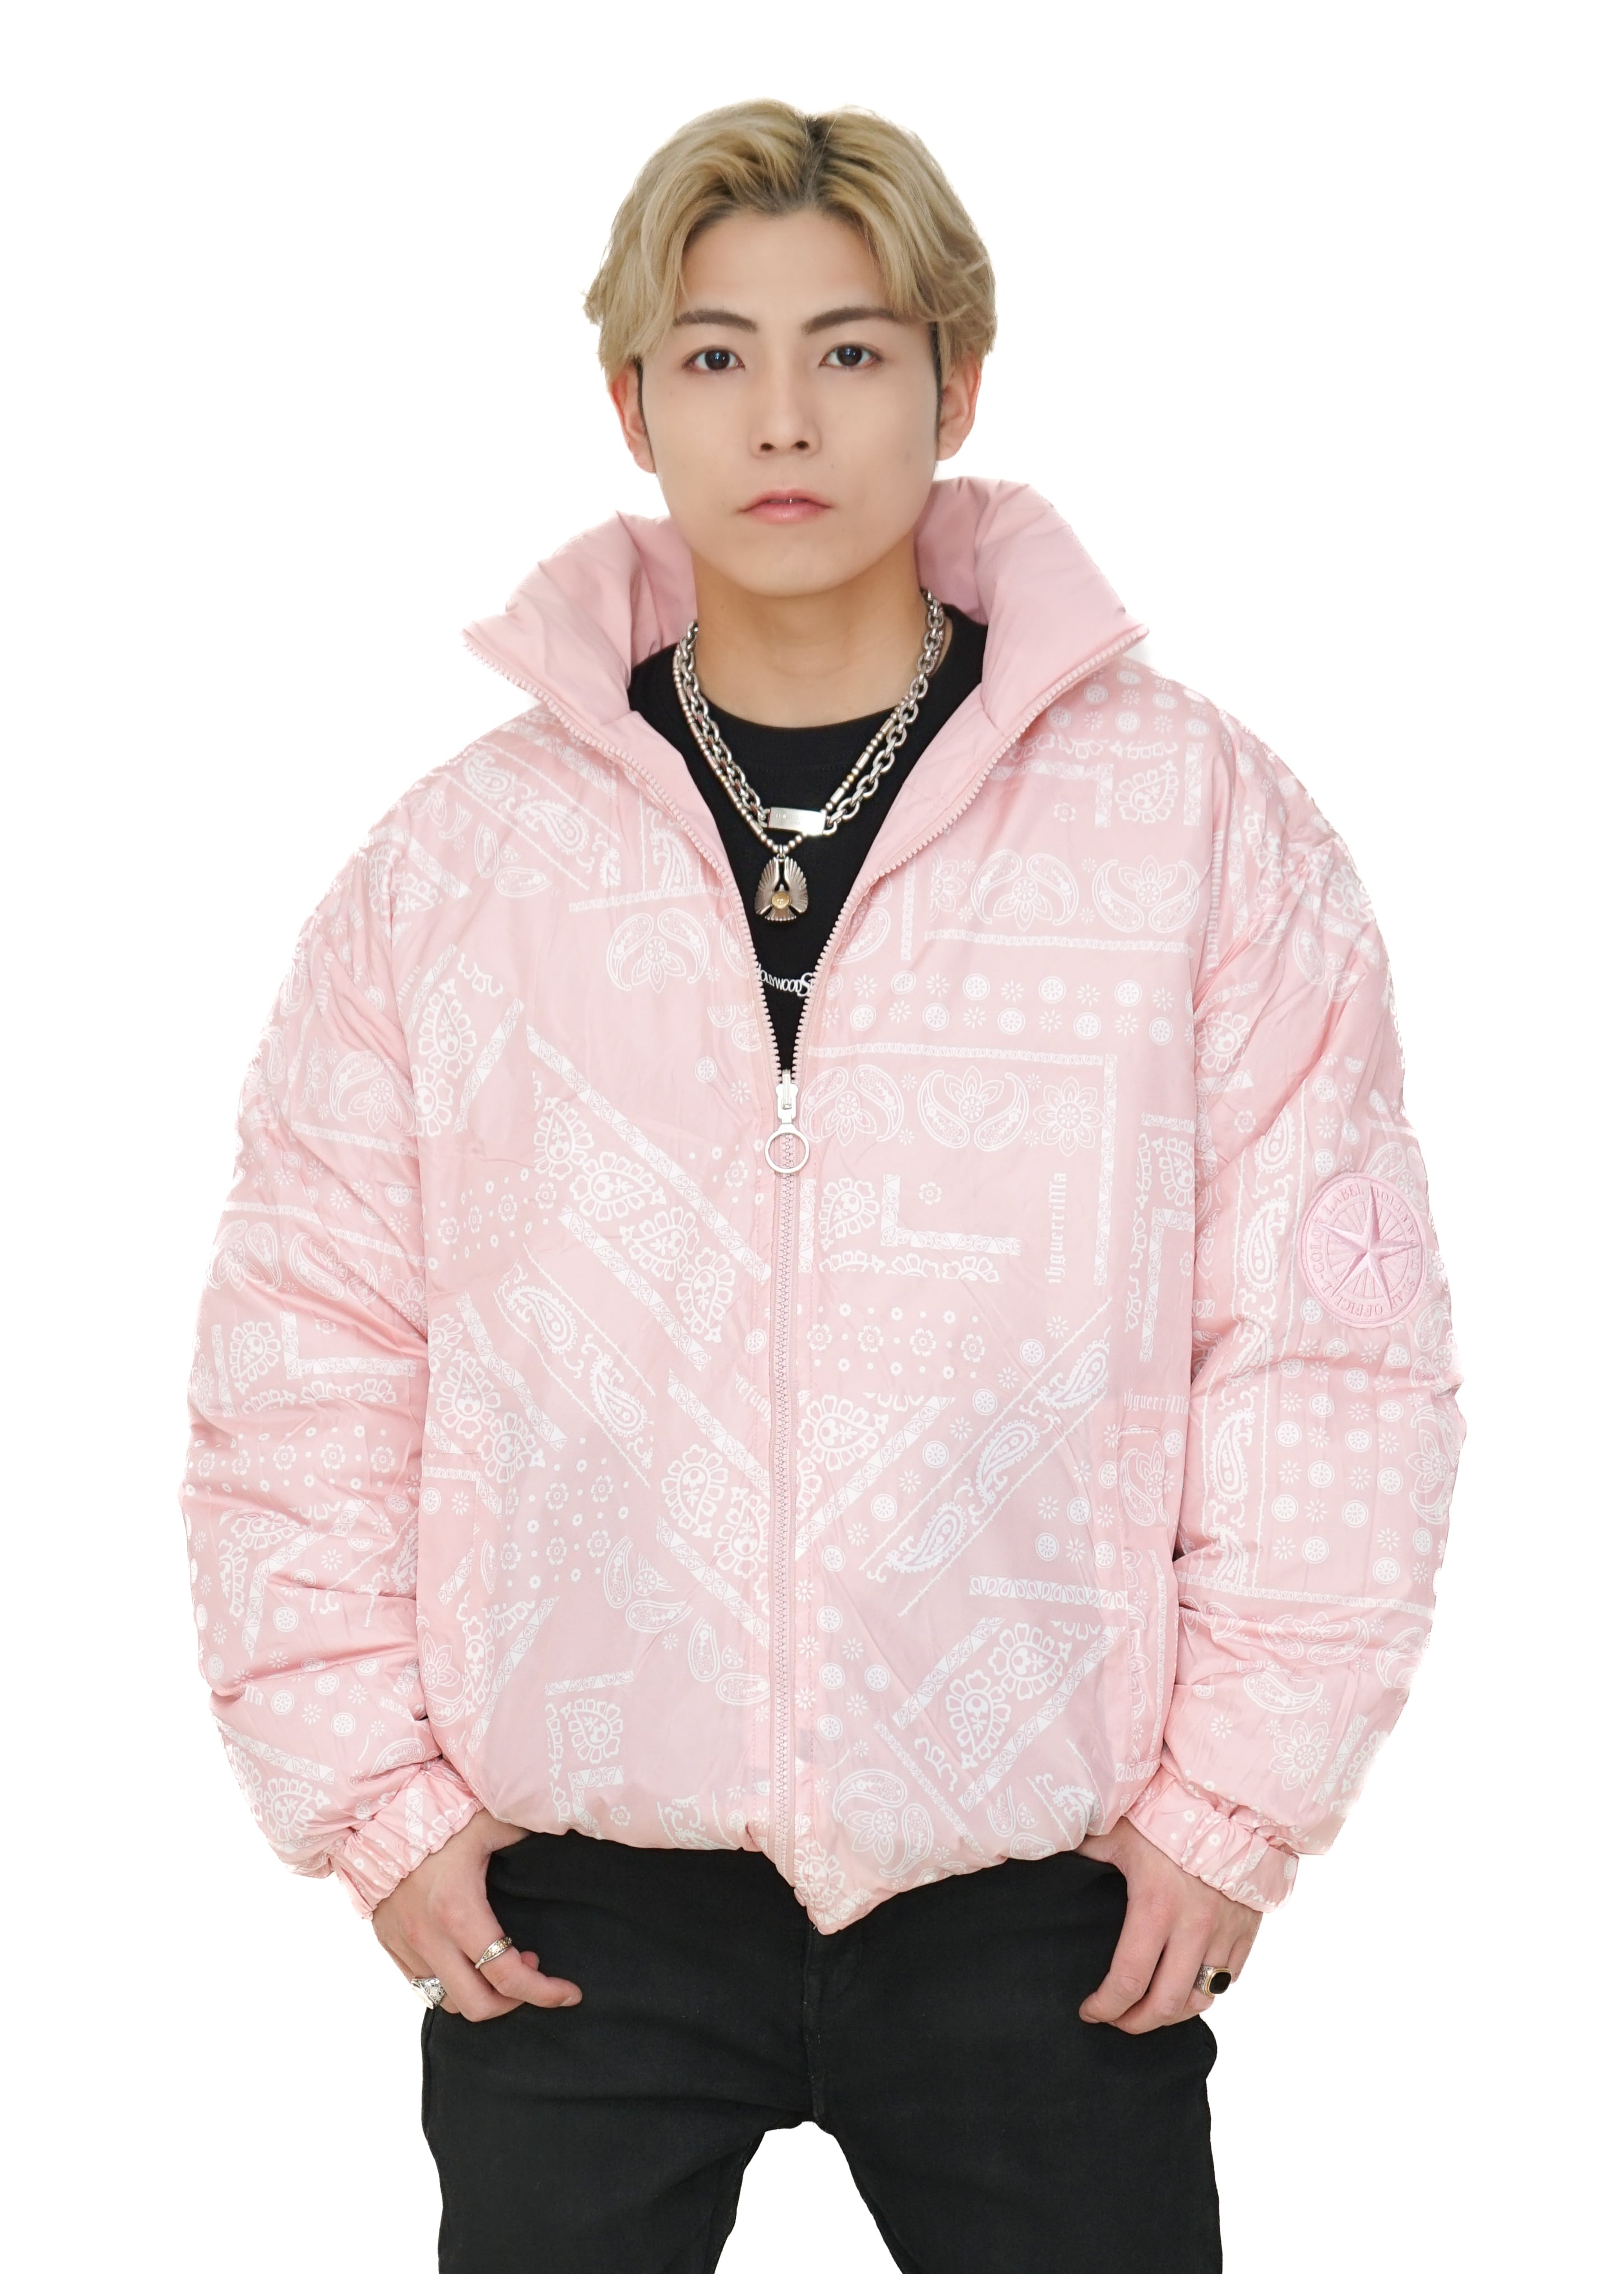 66.COLOR LABEL PUFFY JACKET【PINK】 | HOLLYWOOD STAR OFFICIAL powered by BASE